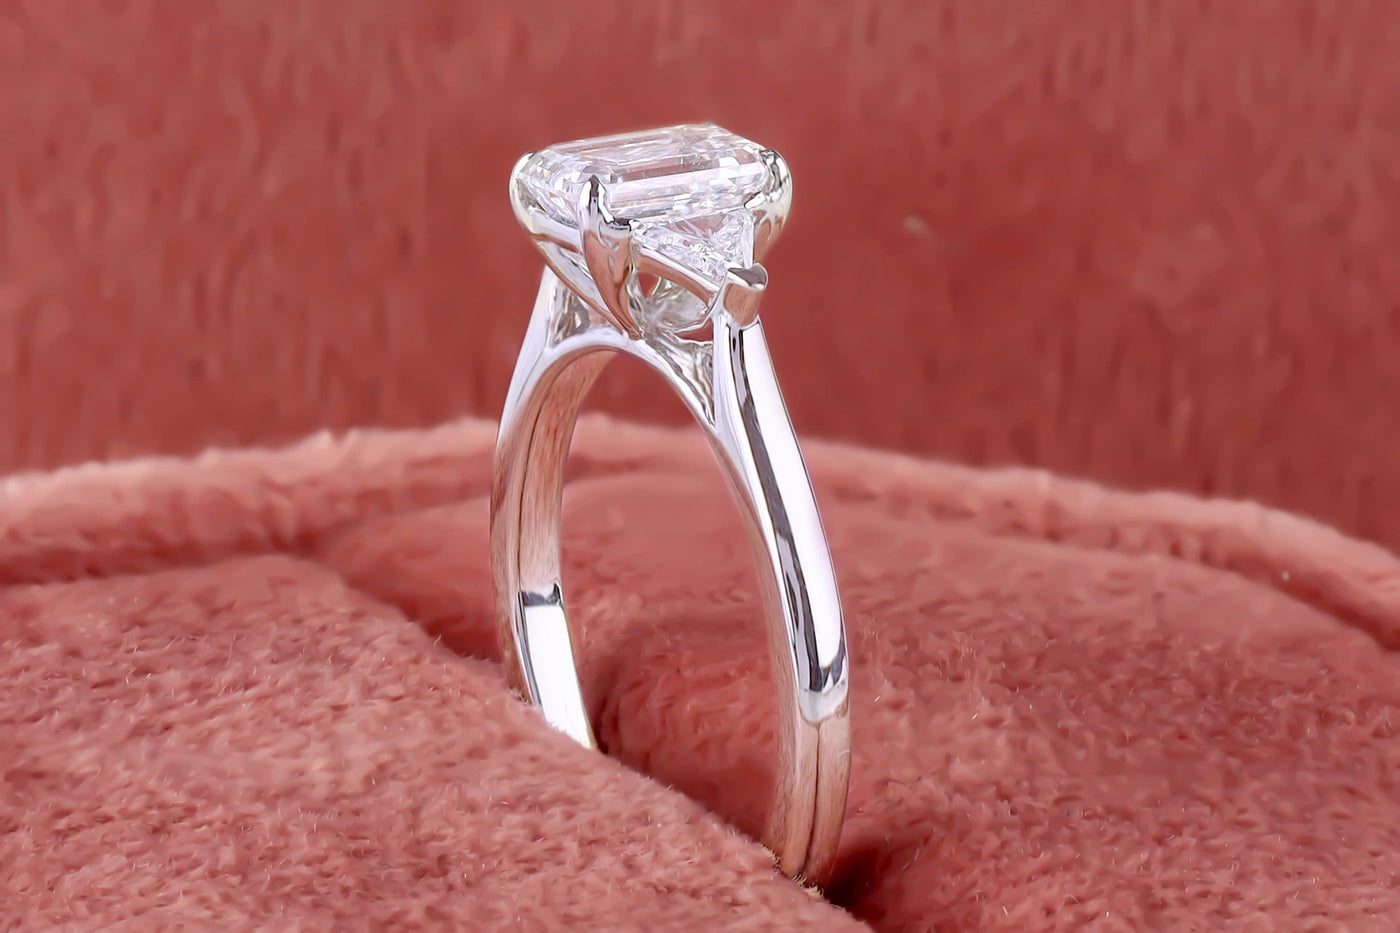 1 Ct Emerald Cut Colorless Moissanite Engagement Ring, Solid White Gold Ring, Three Stone Solitaire Wedding Ring, Triangle Moissanite Ring